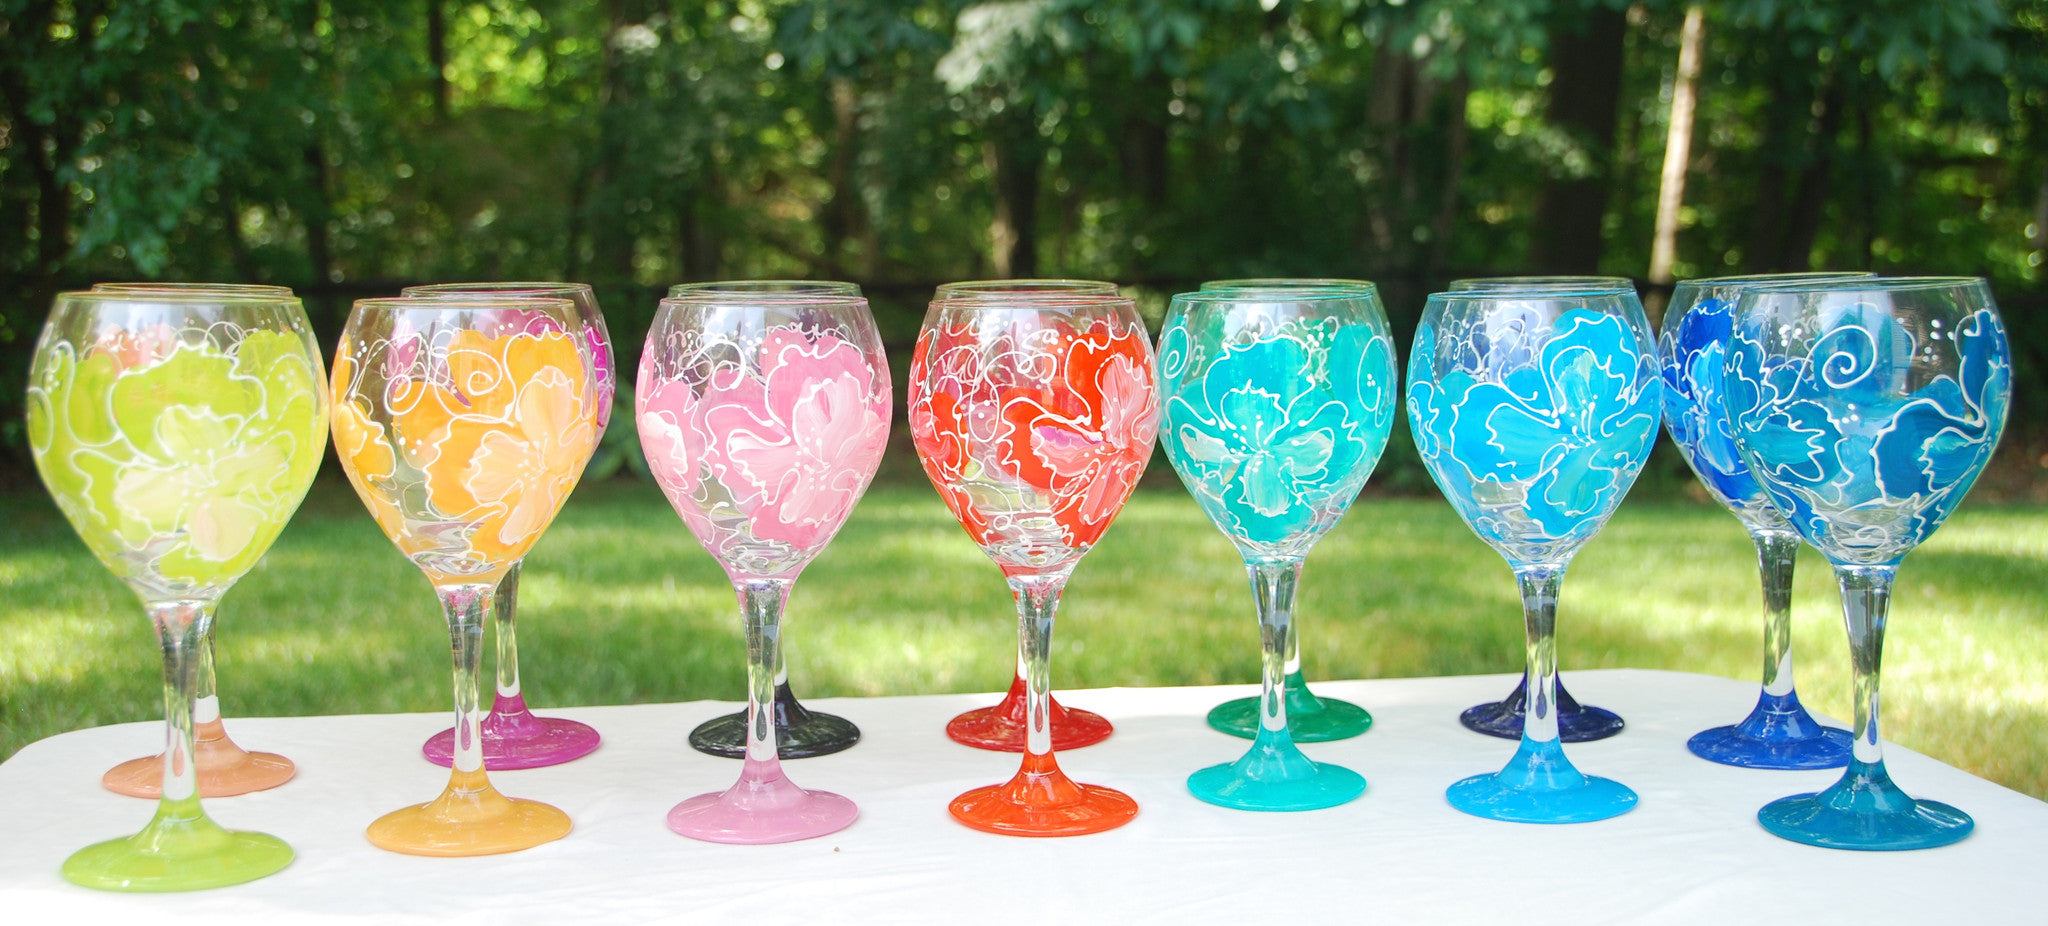 Poinsettia Hand-painted Glassware – Glorious Goblets